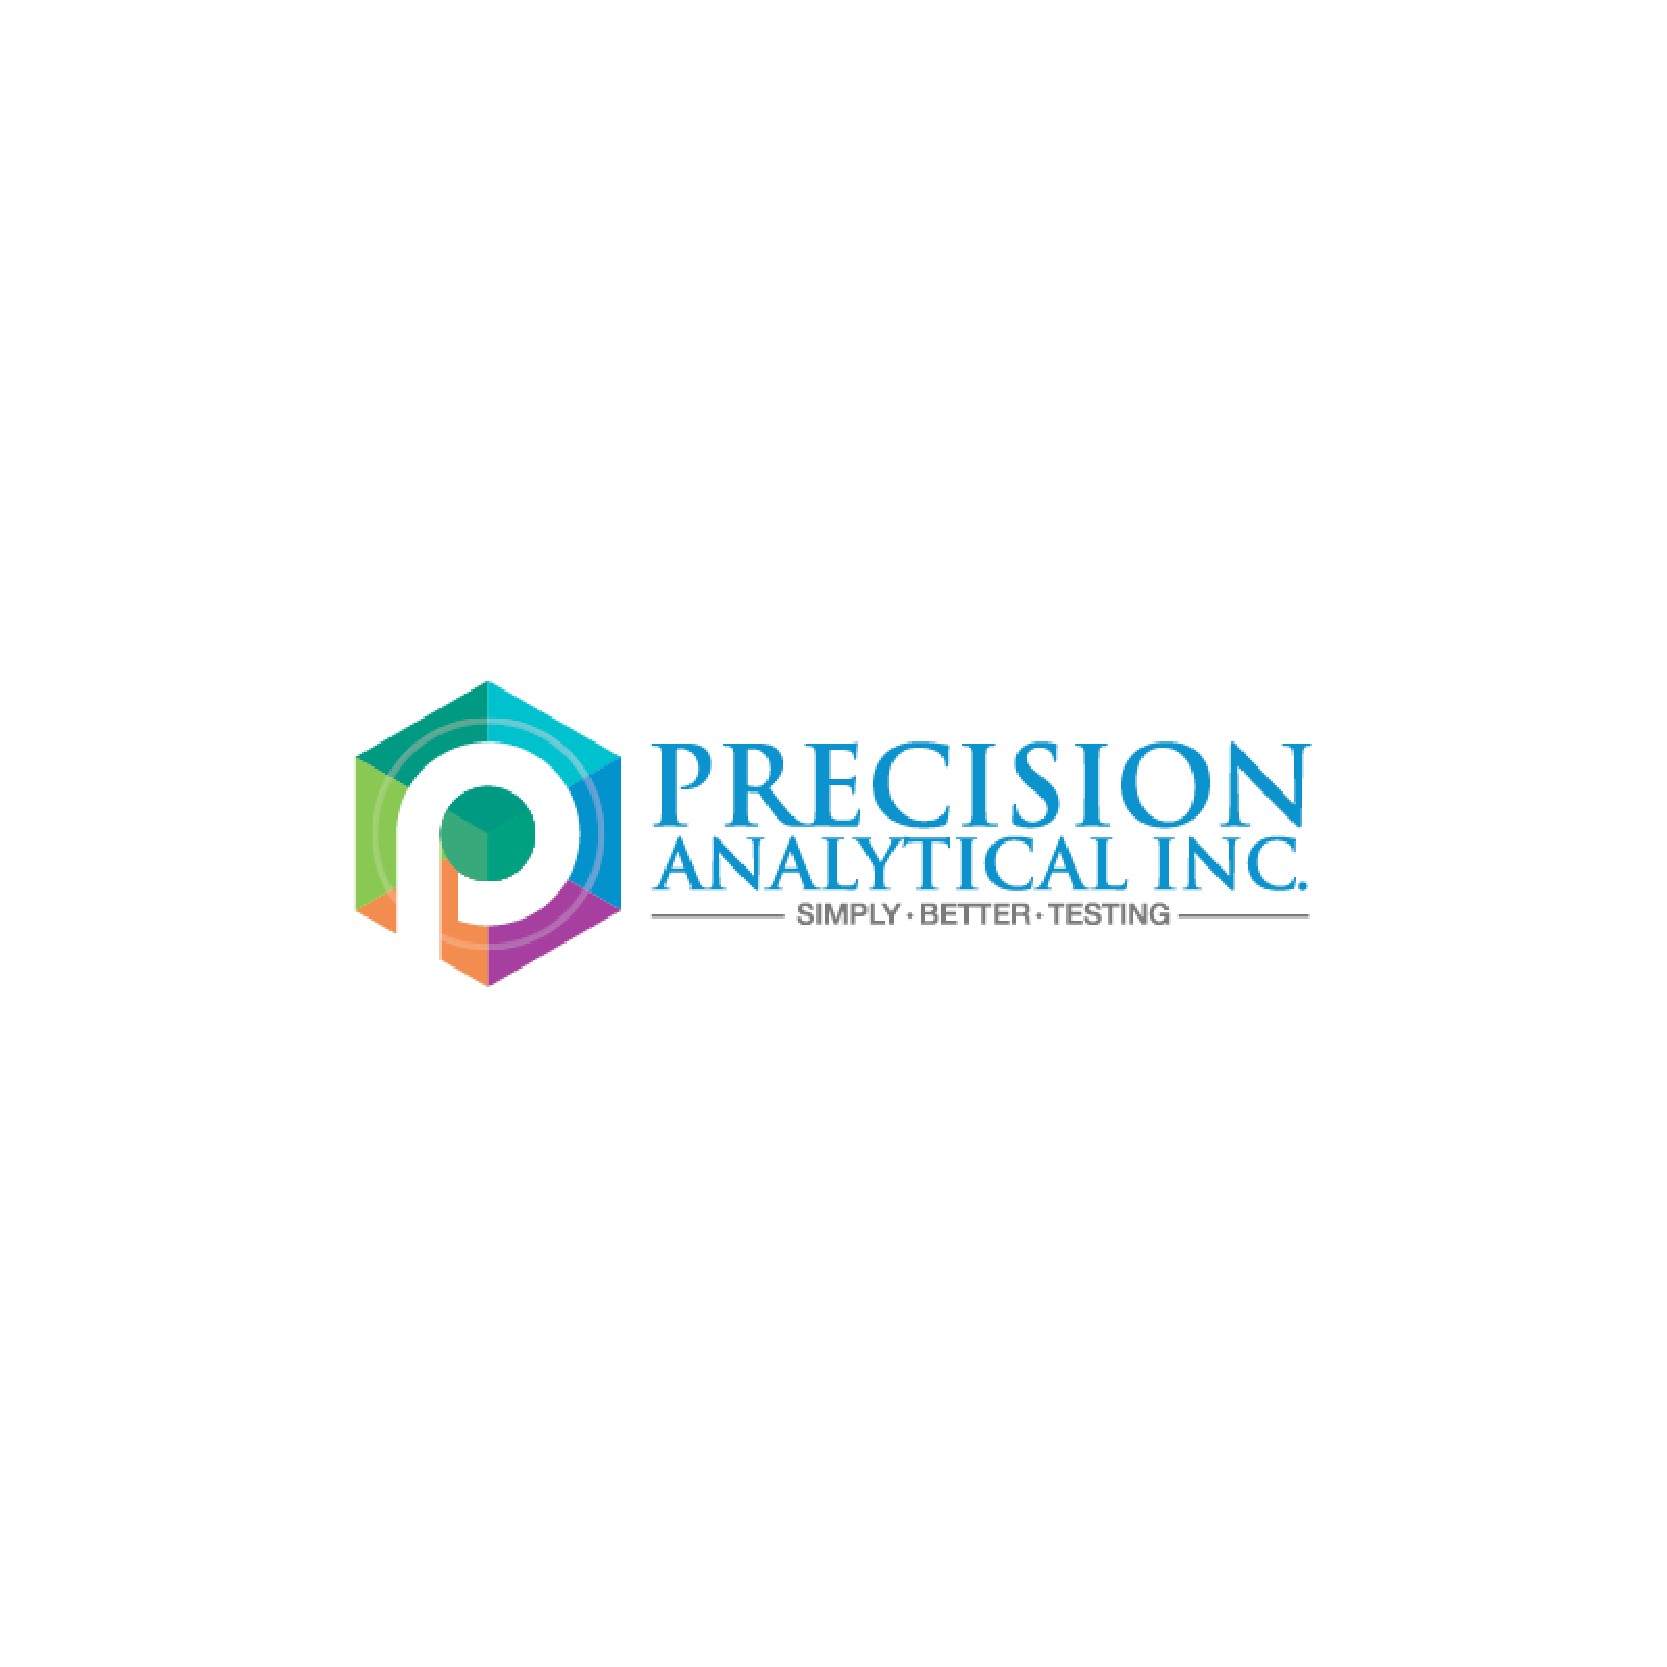 Precision Analytical